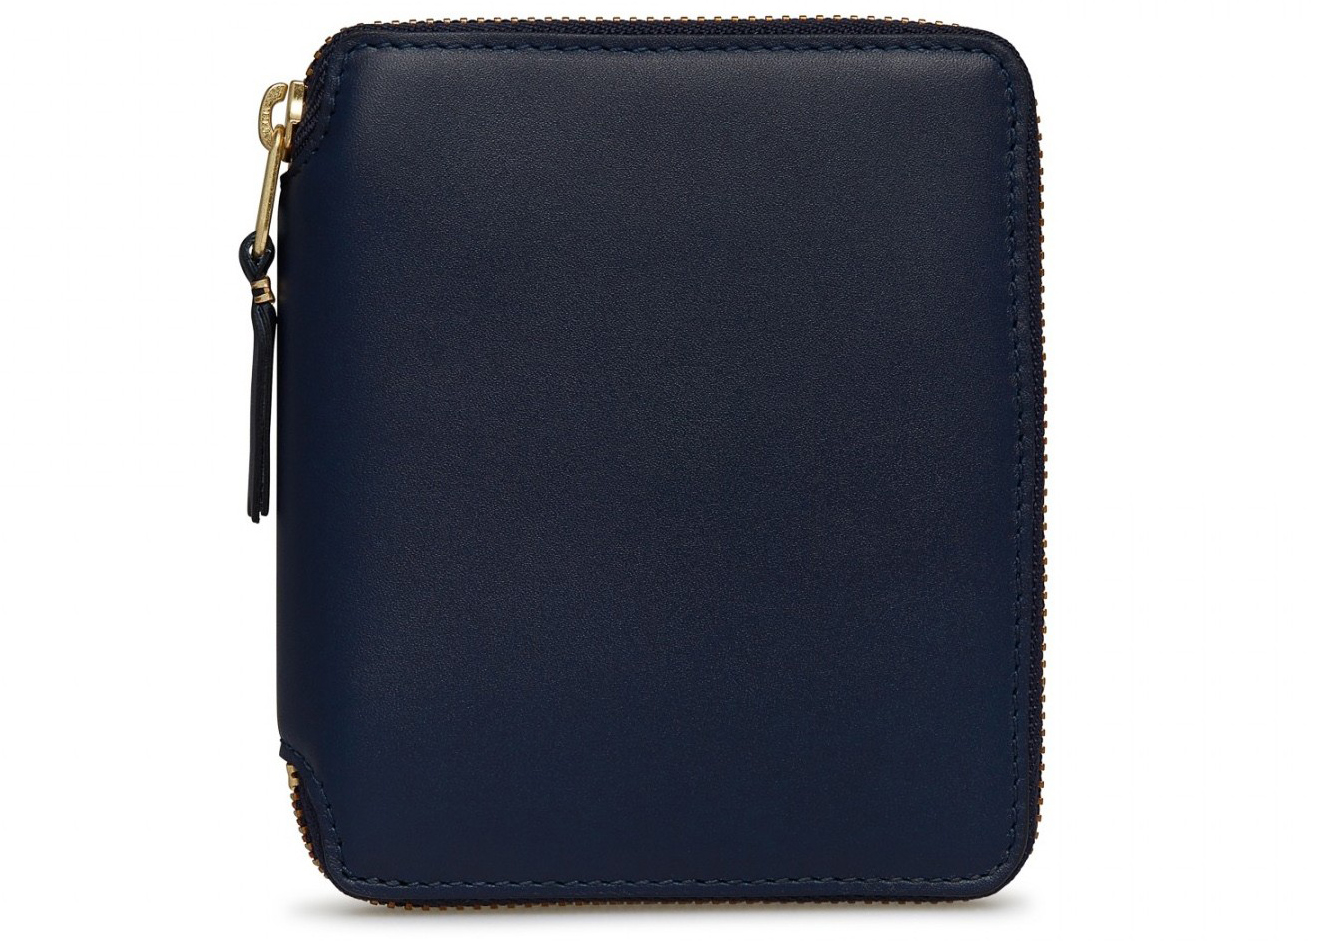 Comme des Garcons SA2100 Classic Wallet Navy in Leather with Gold